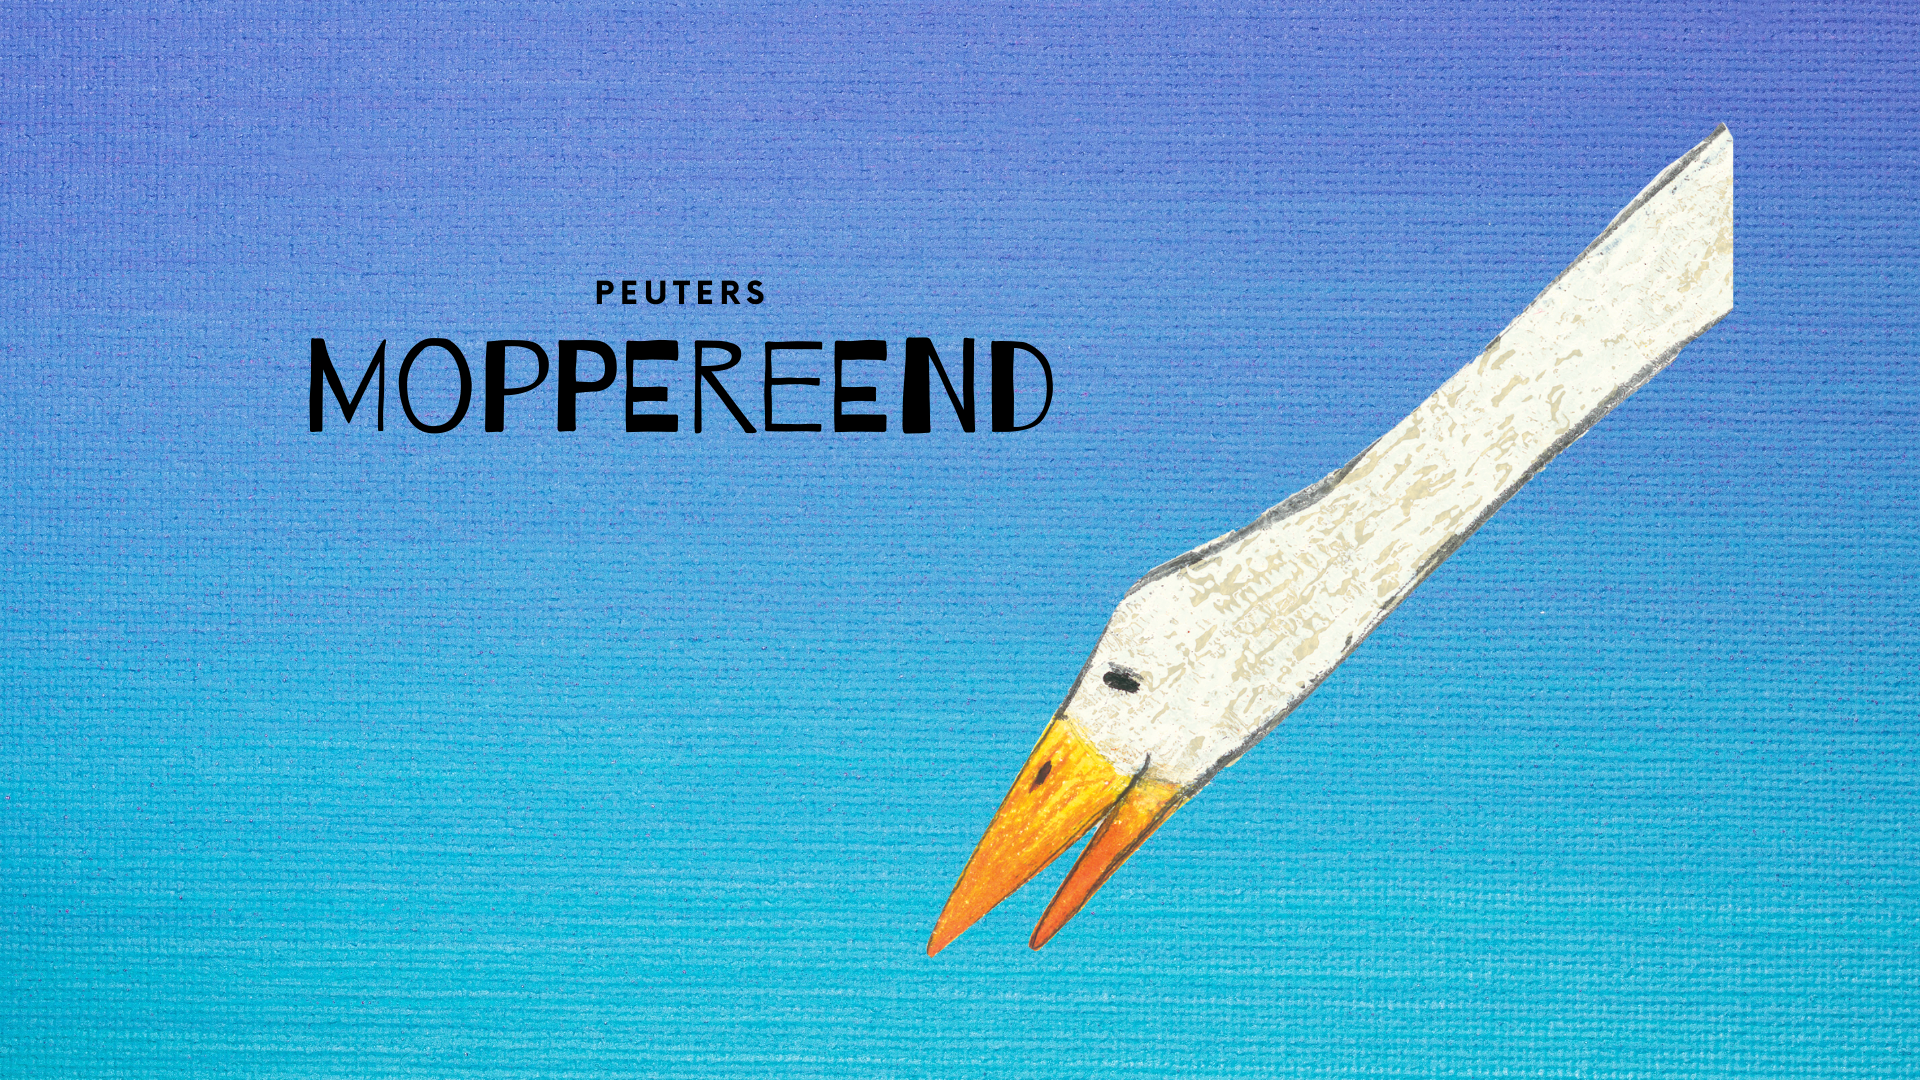 Moppereend peuters